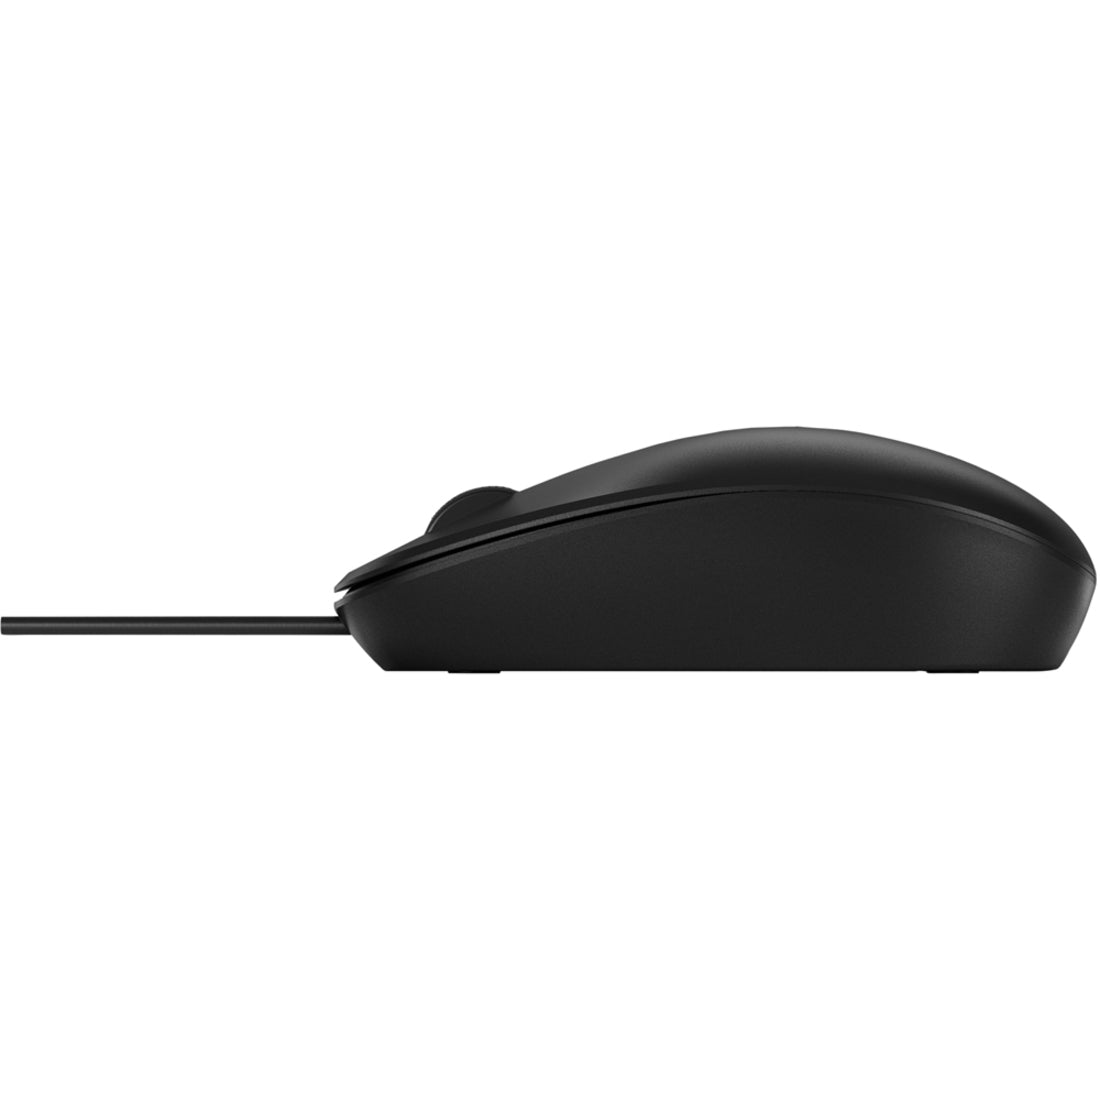 HP 265D9UT 128 Laser Wired Mouse, 1200 dpi, USB Connectivity